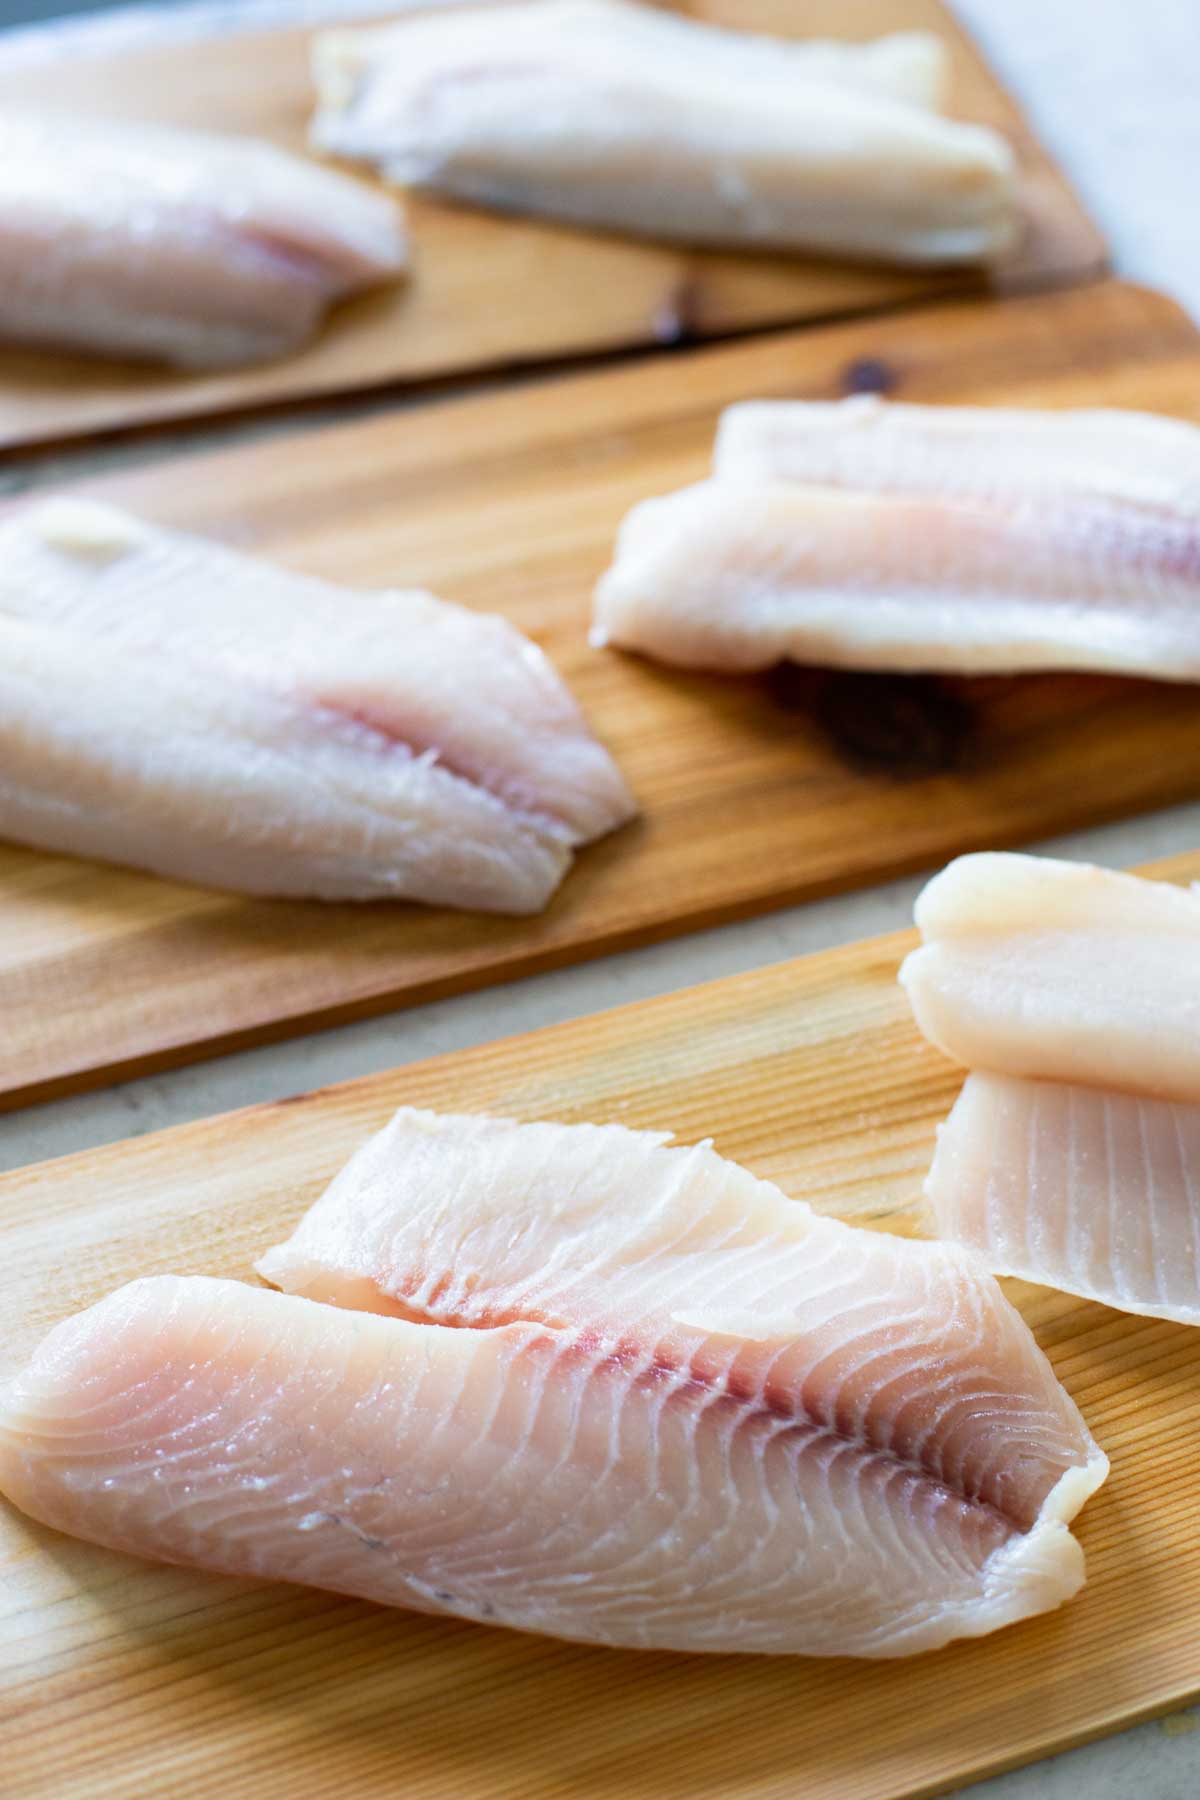 The raw fresh tilapia is waiting to be prepared.